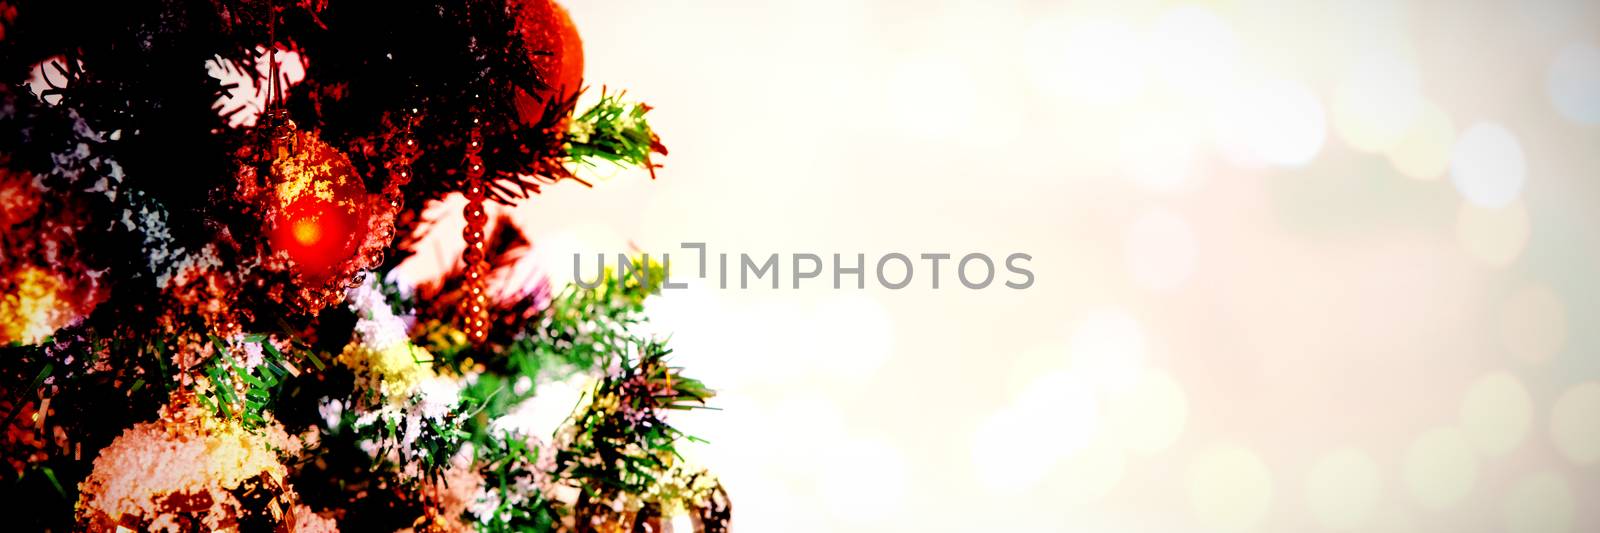 Composite image of table against christmas ornaments hanging in tree